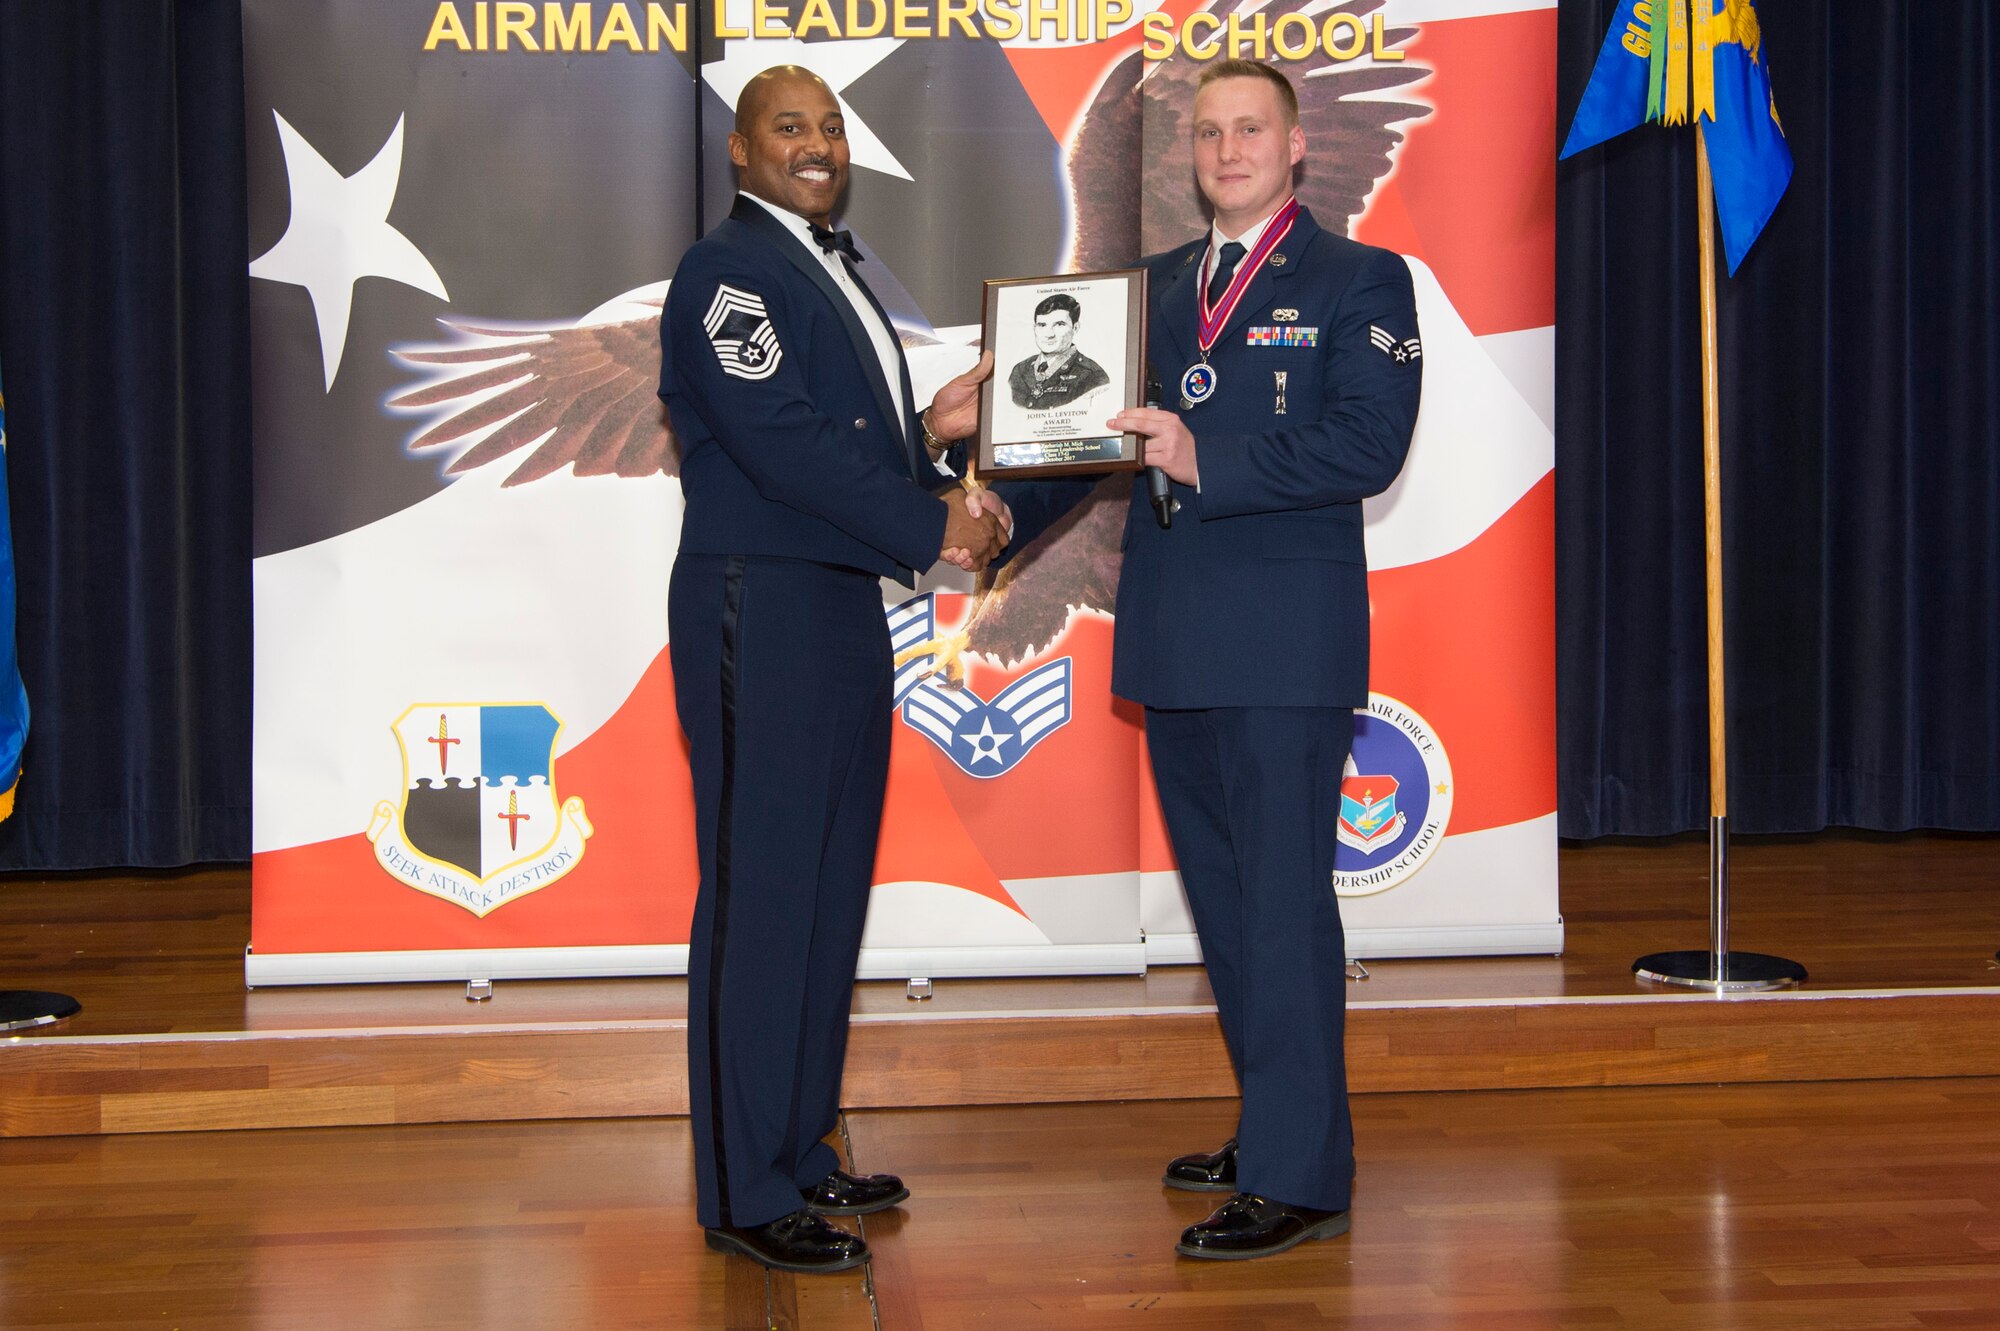 U.S. Air Force Staff Sgt. Zachariah Mick, 52nd Maintenance Squadron munitions controller, receives the John L. Levitow during the Pitsenbarger Airman Leadership School 17-G graduation at Club Eifel on Spangdahlem Air Base, Germany, October 12, 2017. The Levitow award is the highest honor given to the student who displays excellence in all categories of ALS. (U.S. Air Force photo by Senior Airman Dawn M. Weber)